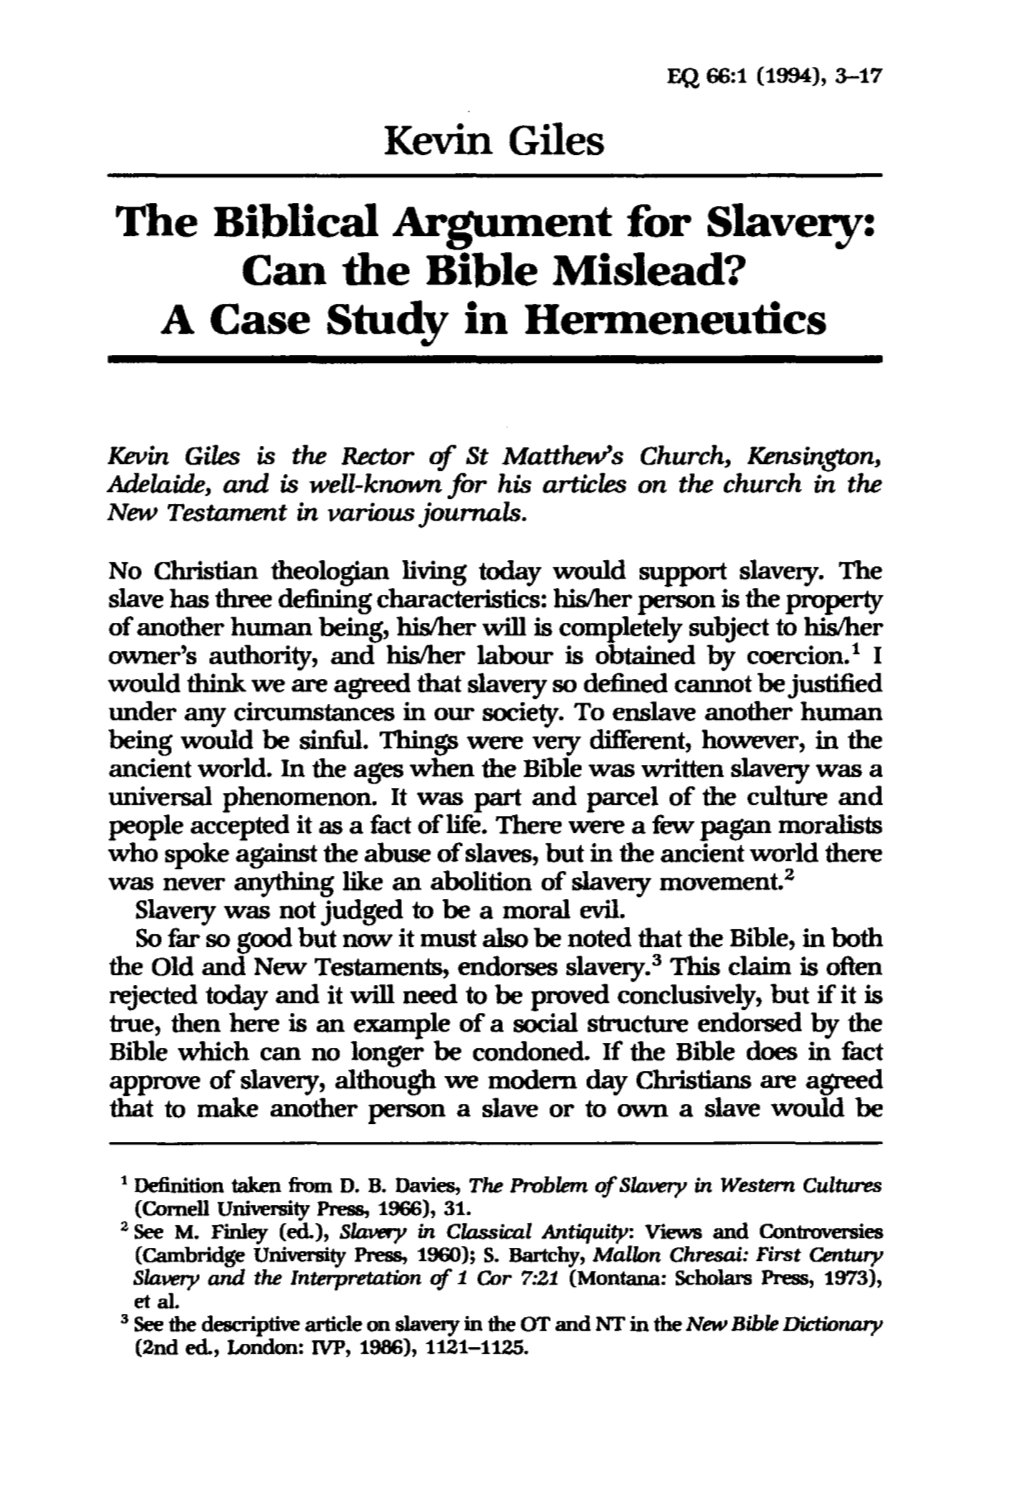 The Biblical Argument for Slavery: Can the Bible Mislead? a Case Study in Hermeneutics